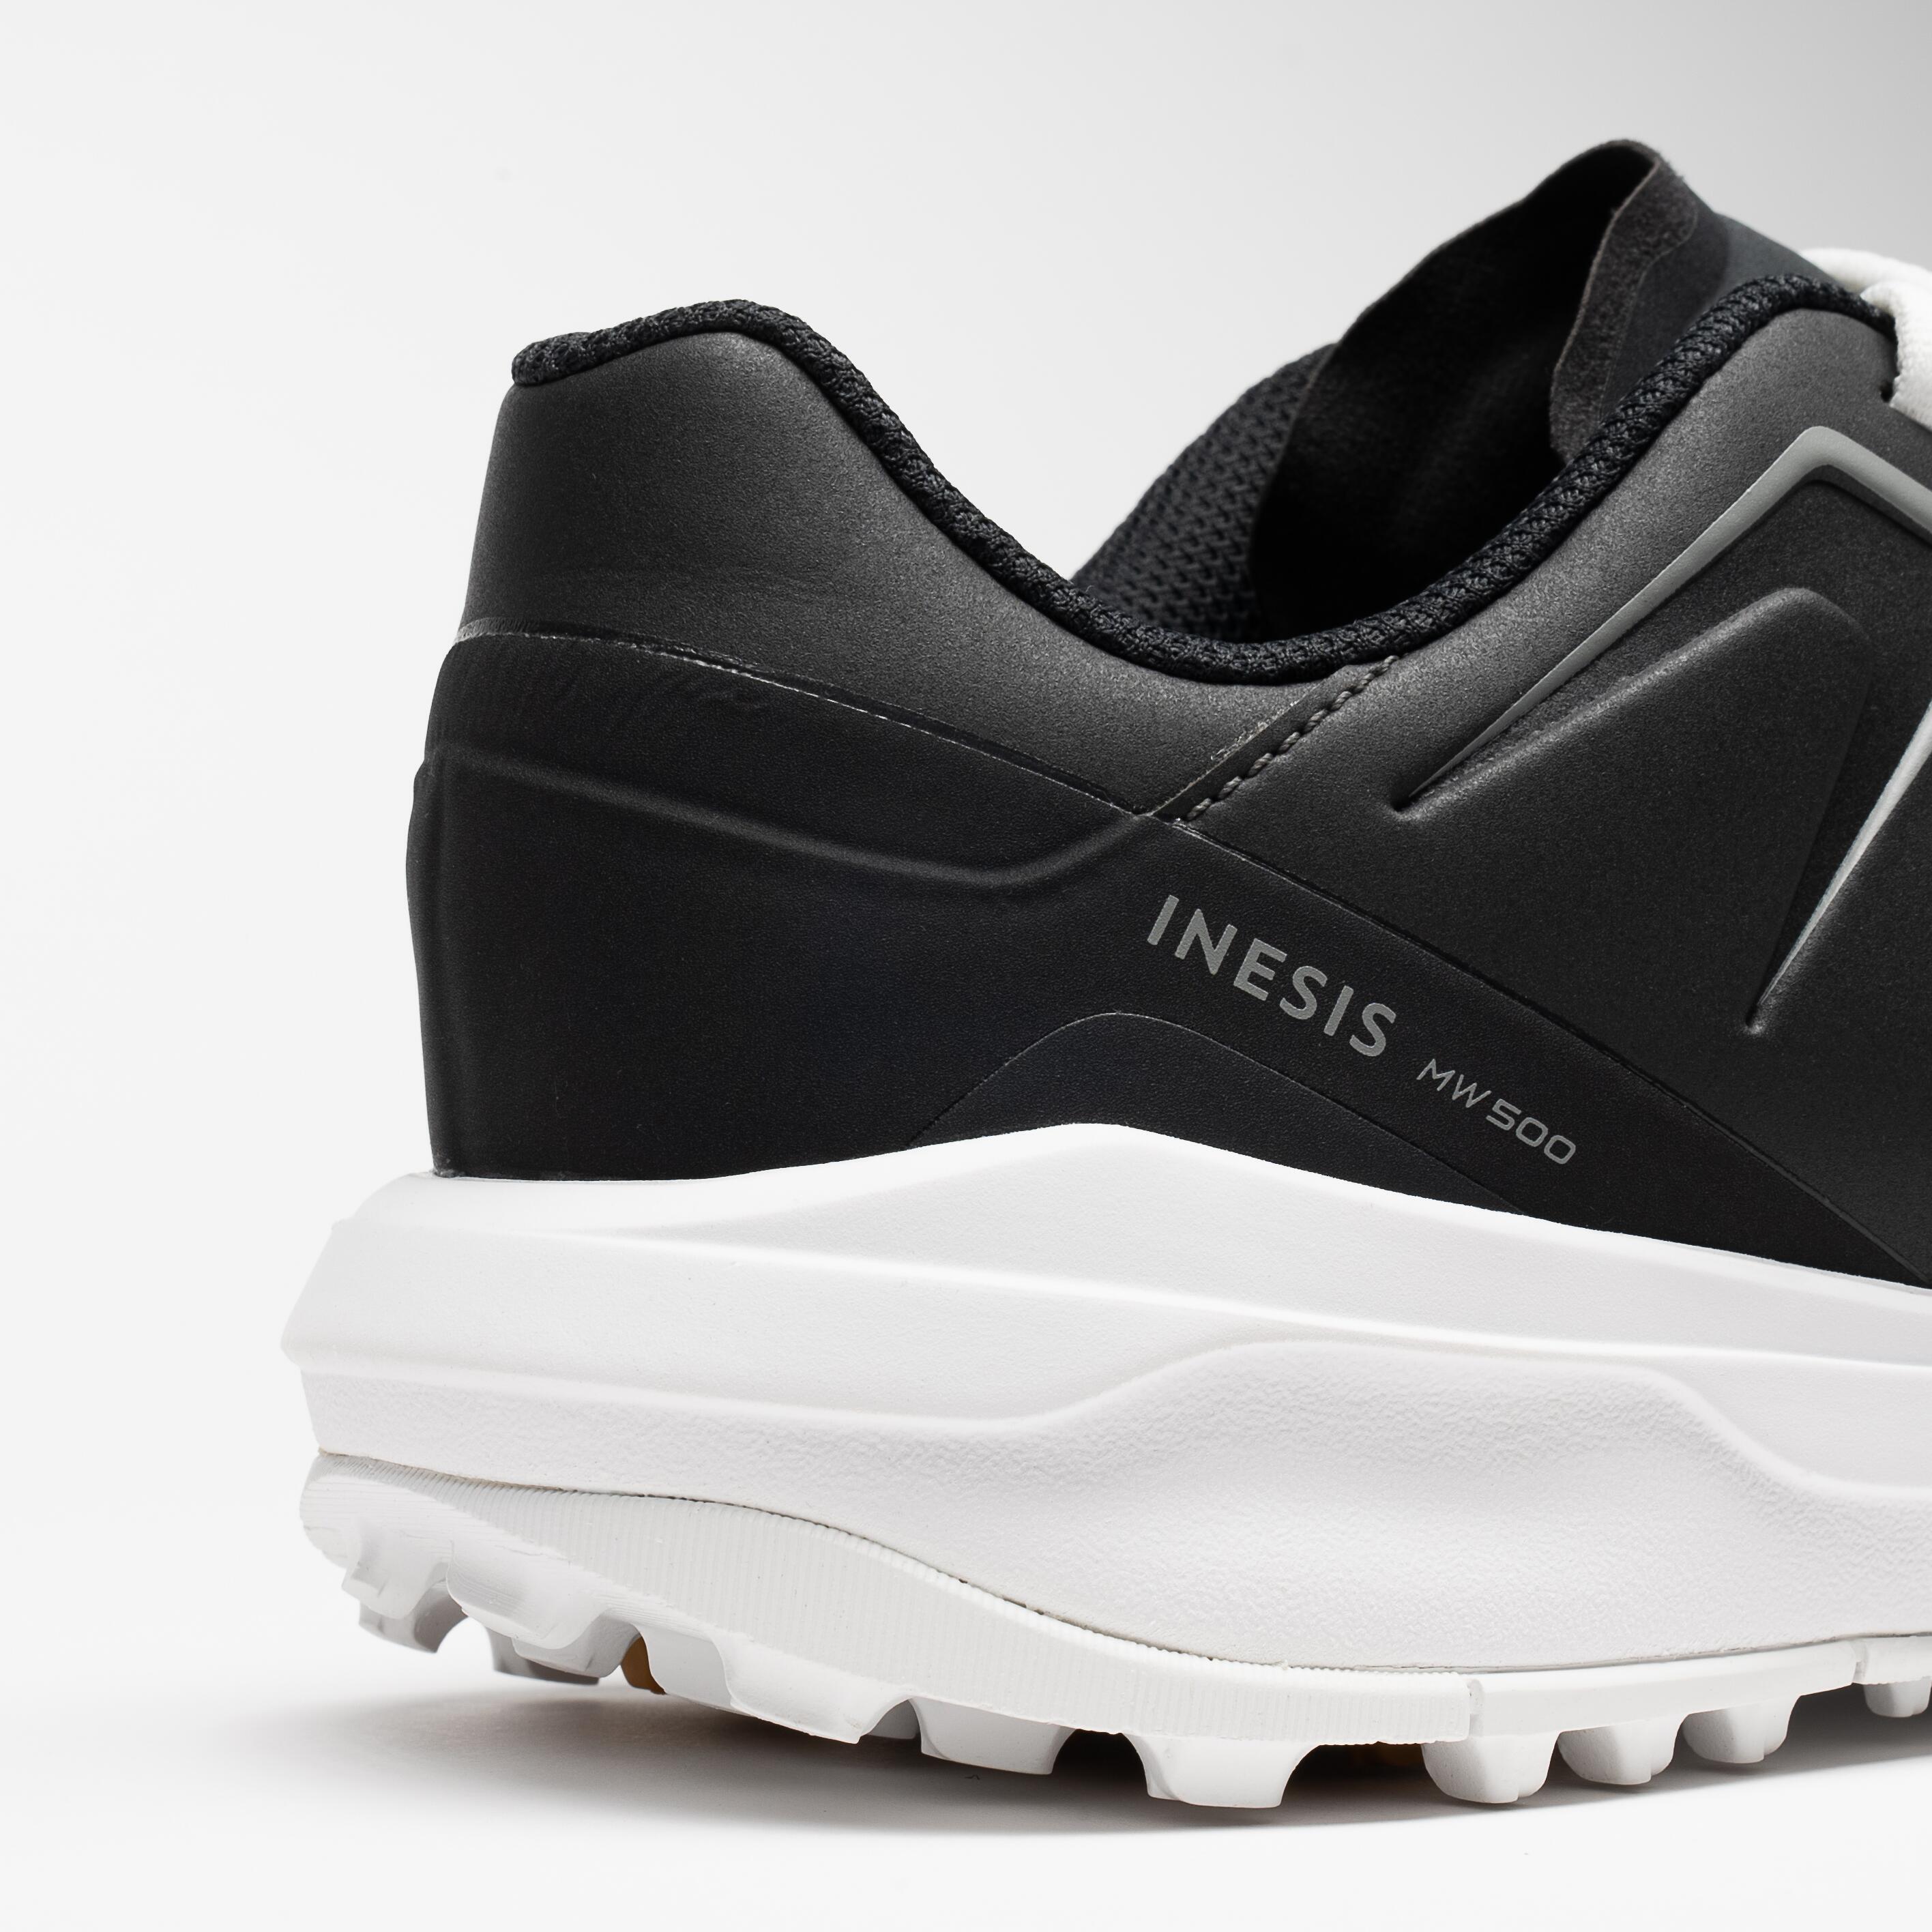 Men's golf waterproof shoes - MW 500 - white and carbon 6/7